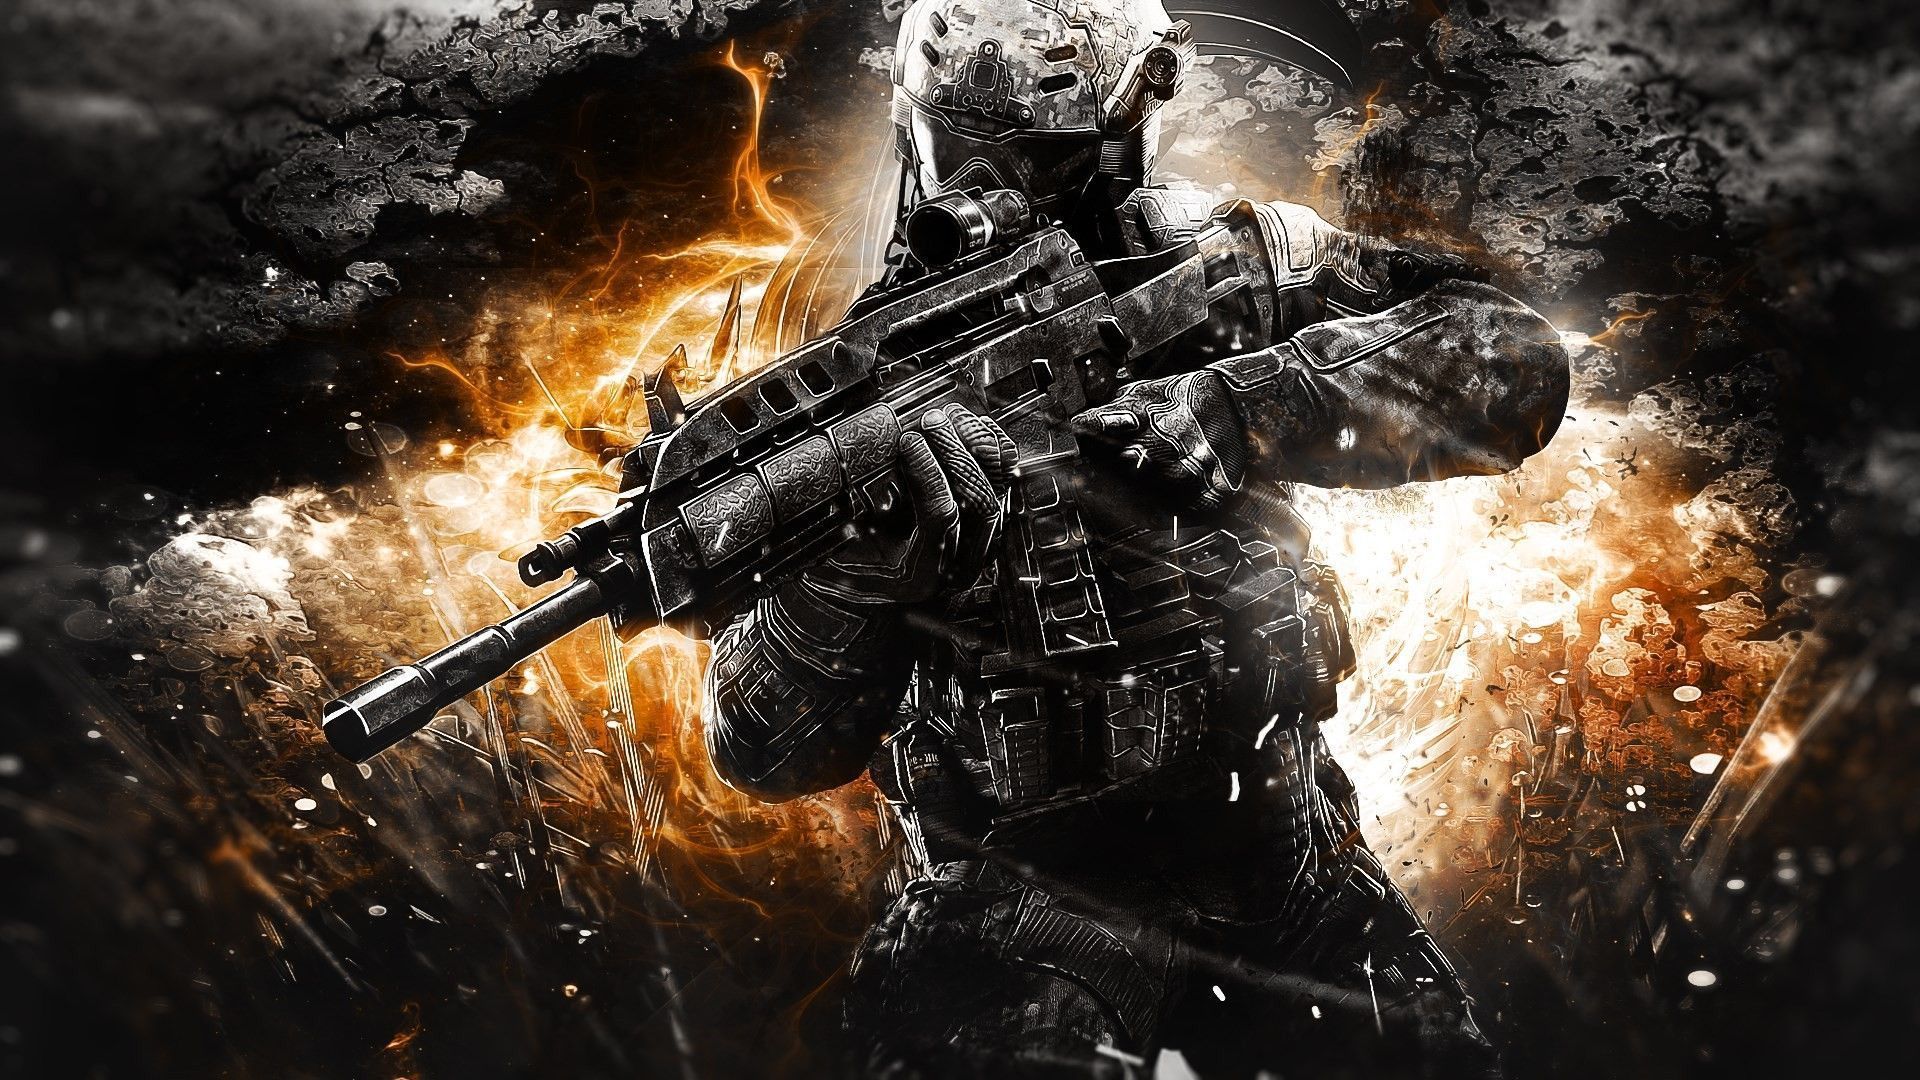 Call Of Duty HD Wallpapers